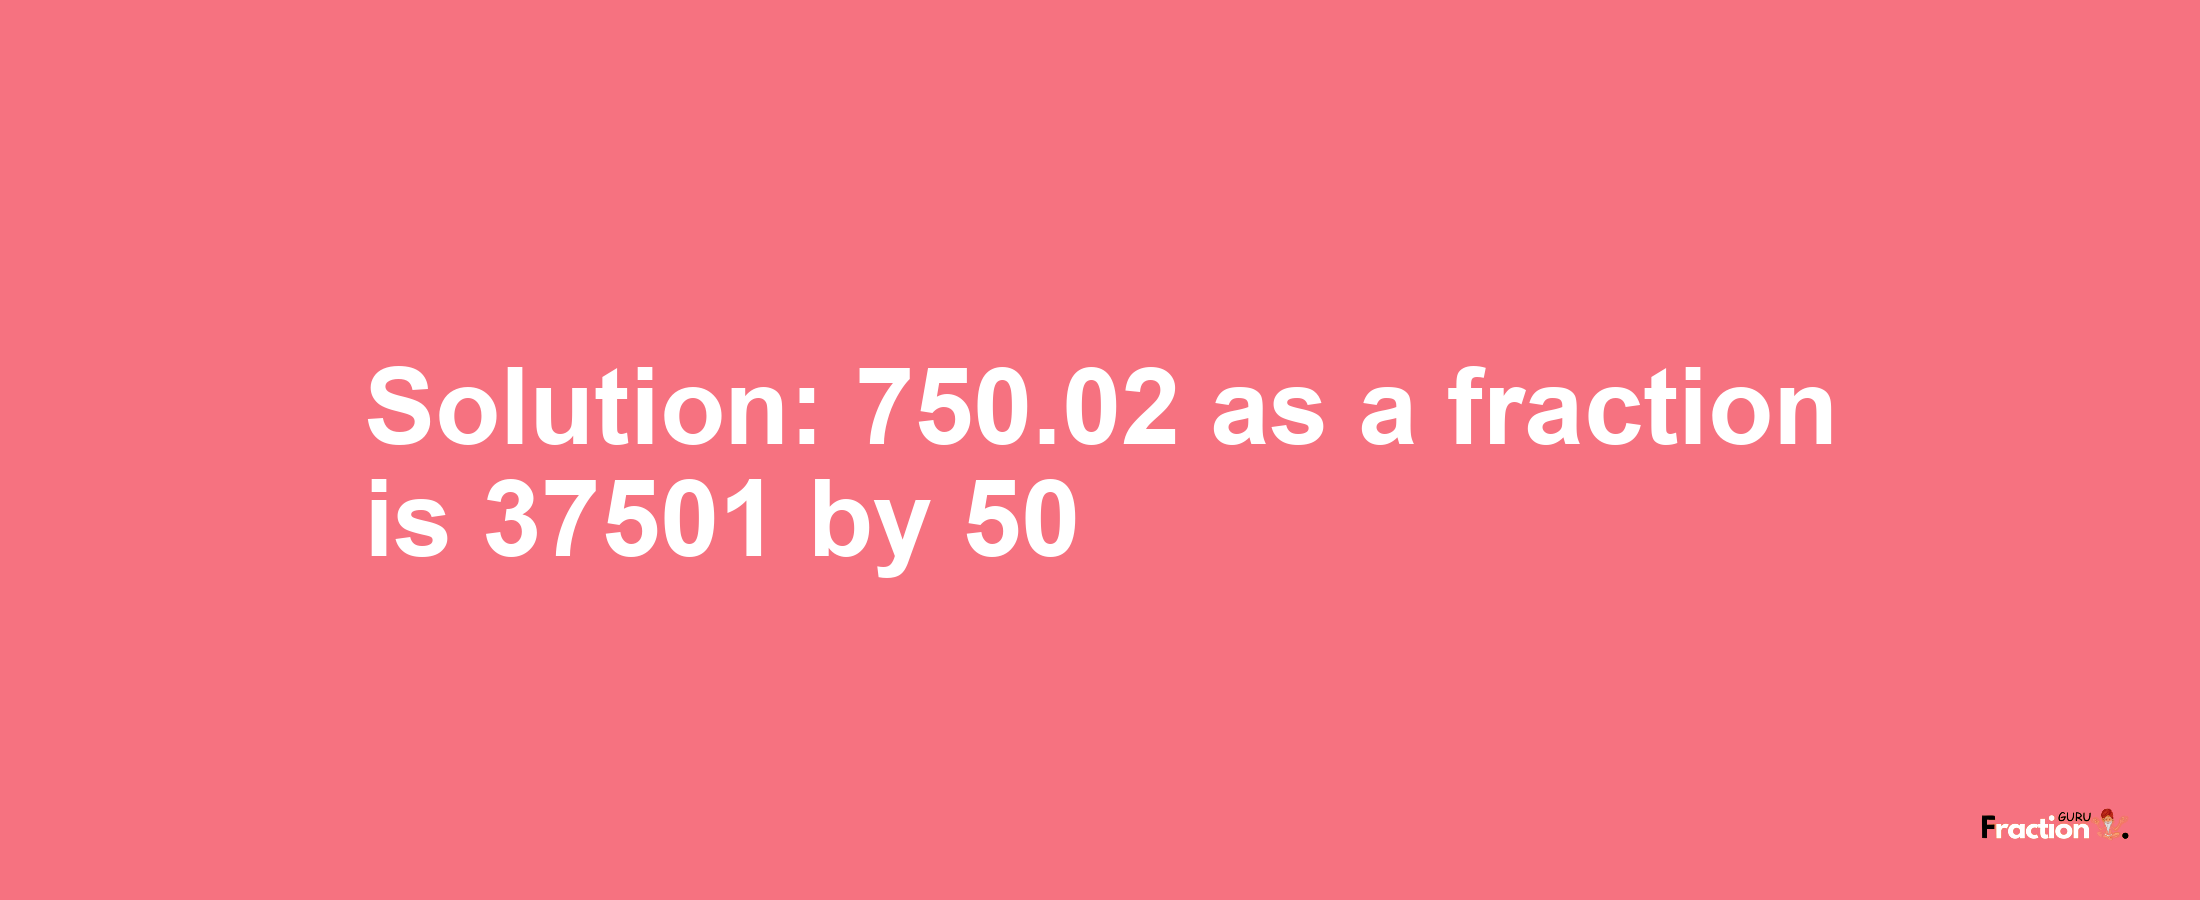 Solution:750.02 as a fraction is 37501/50